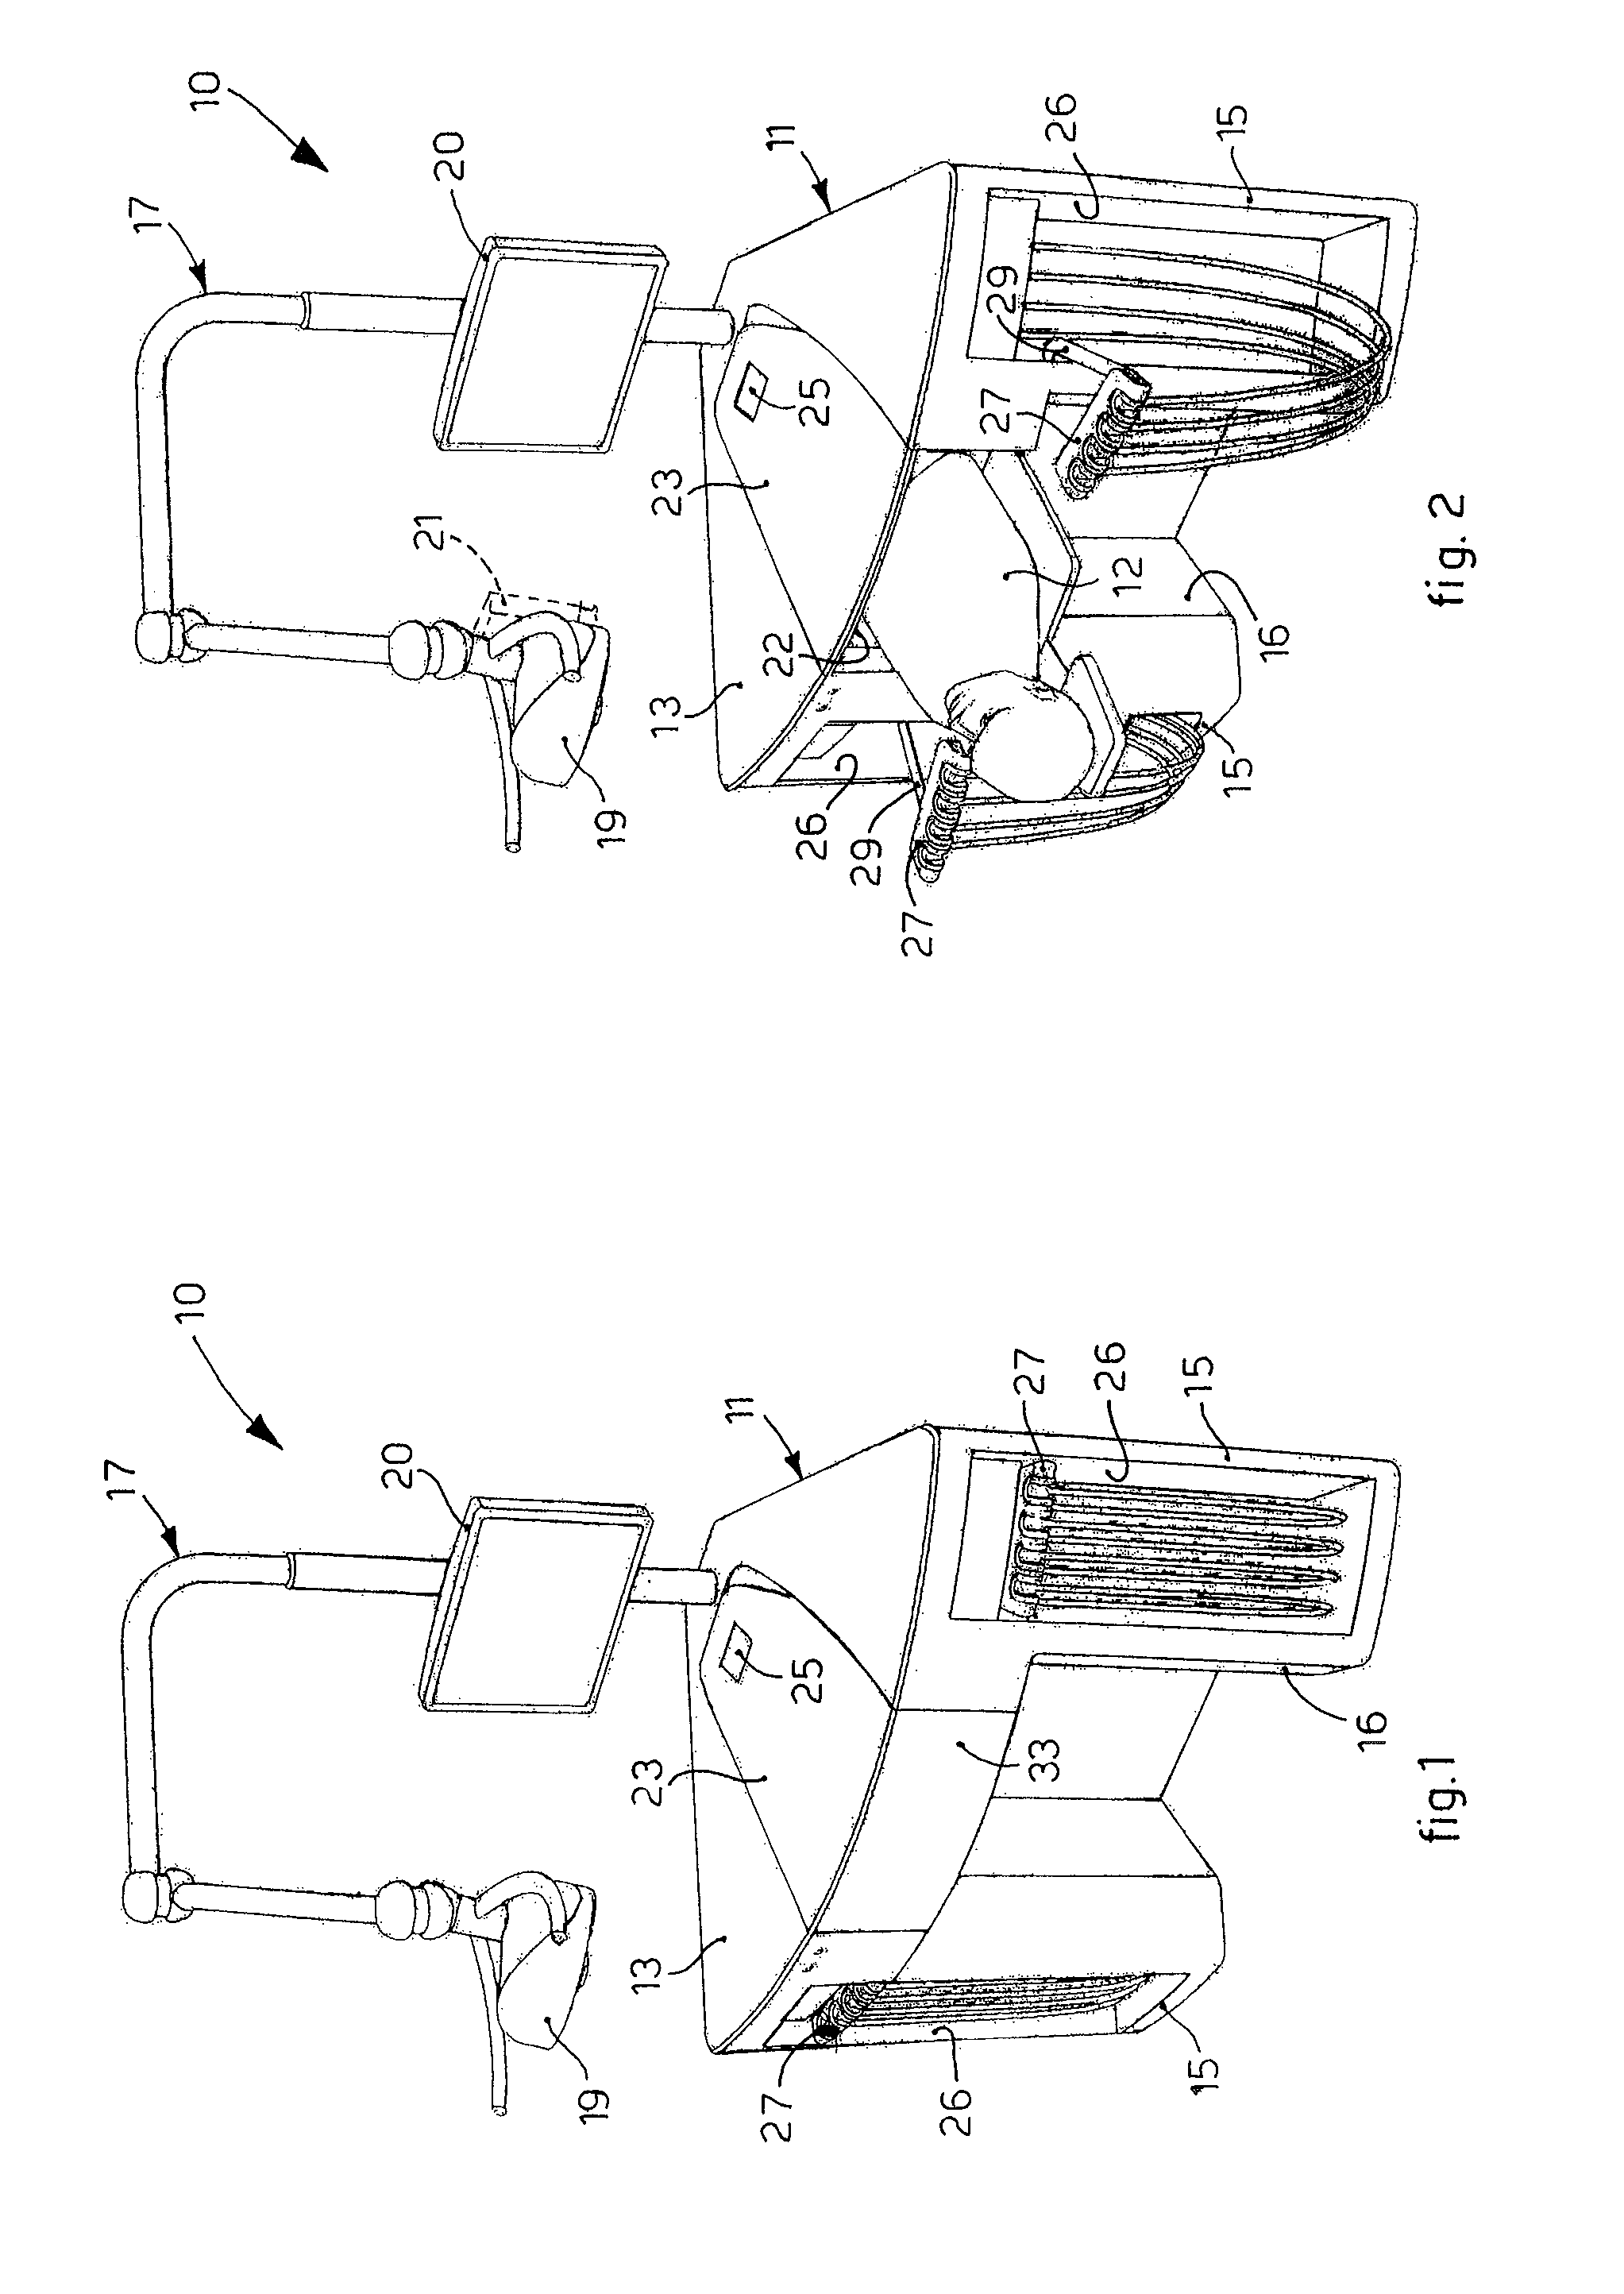 Apparatus for didactic dentistry operations